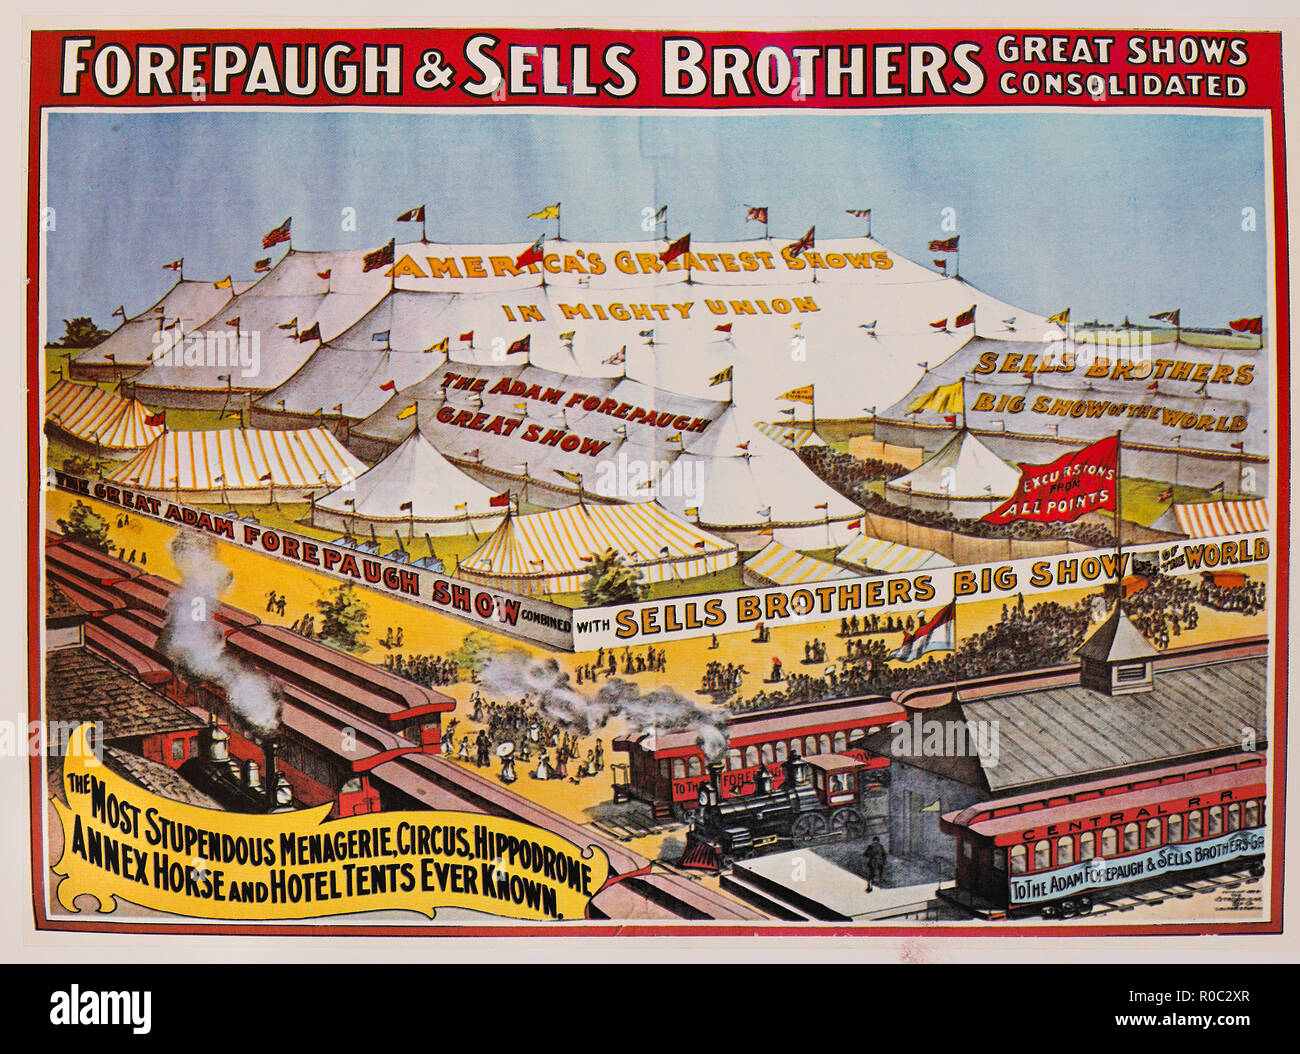 Forepaugh & Sells Brothers Great Shows Consolidated, the Most Stupendous Menagerie, Circus, Hippodrome, Annex Horse and Hotel Tents Even Known, Circus Poster, Lithograph, 1901 Stock Photo